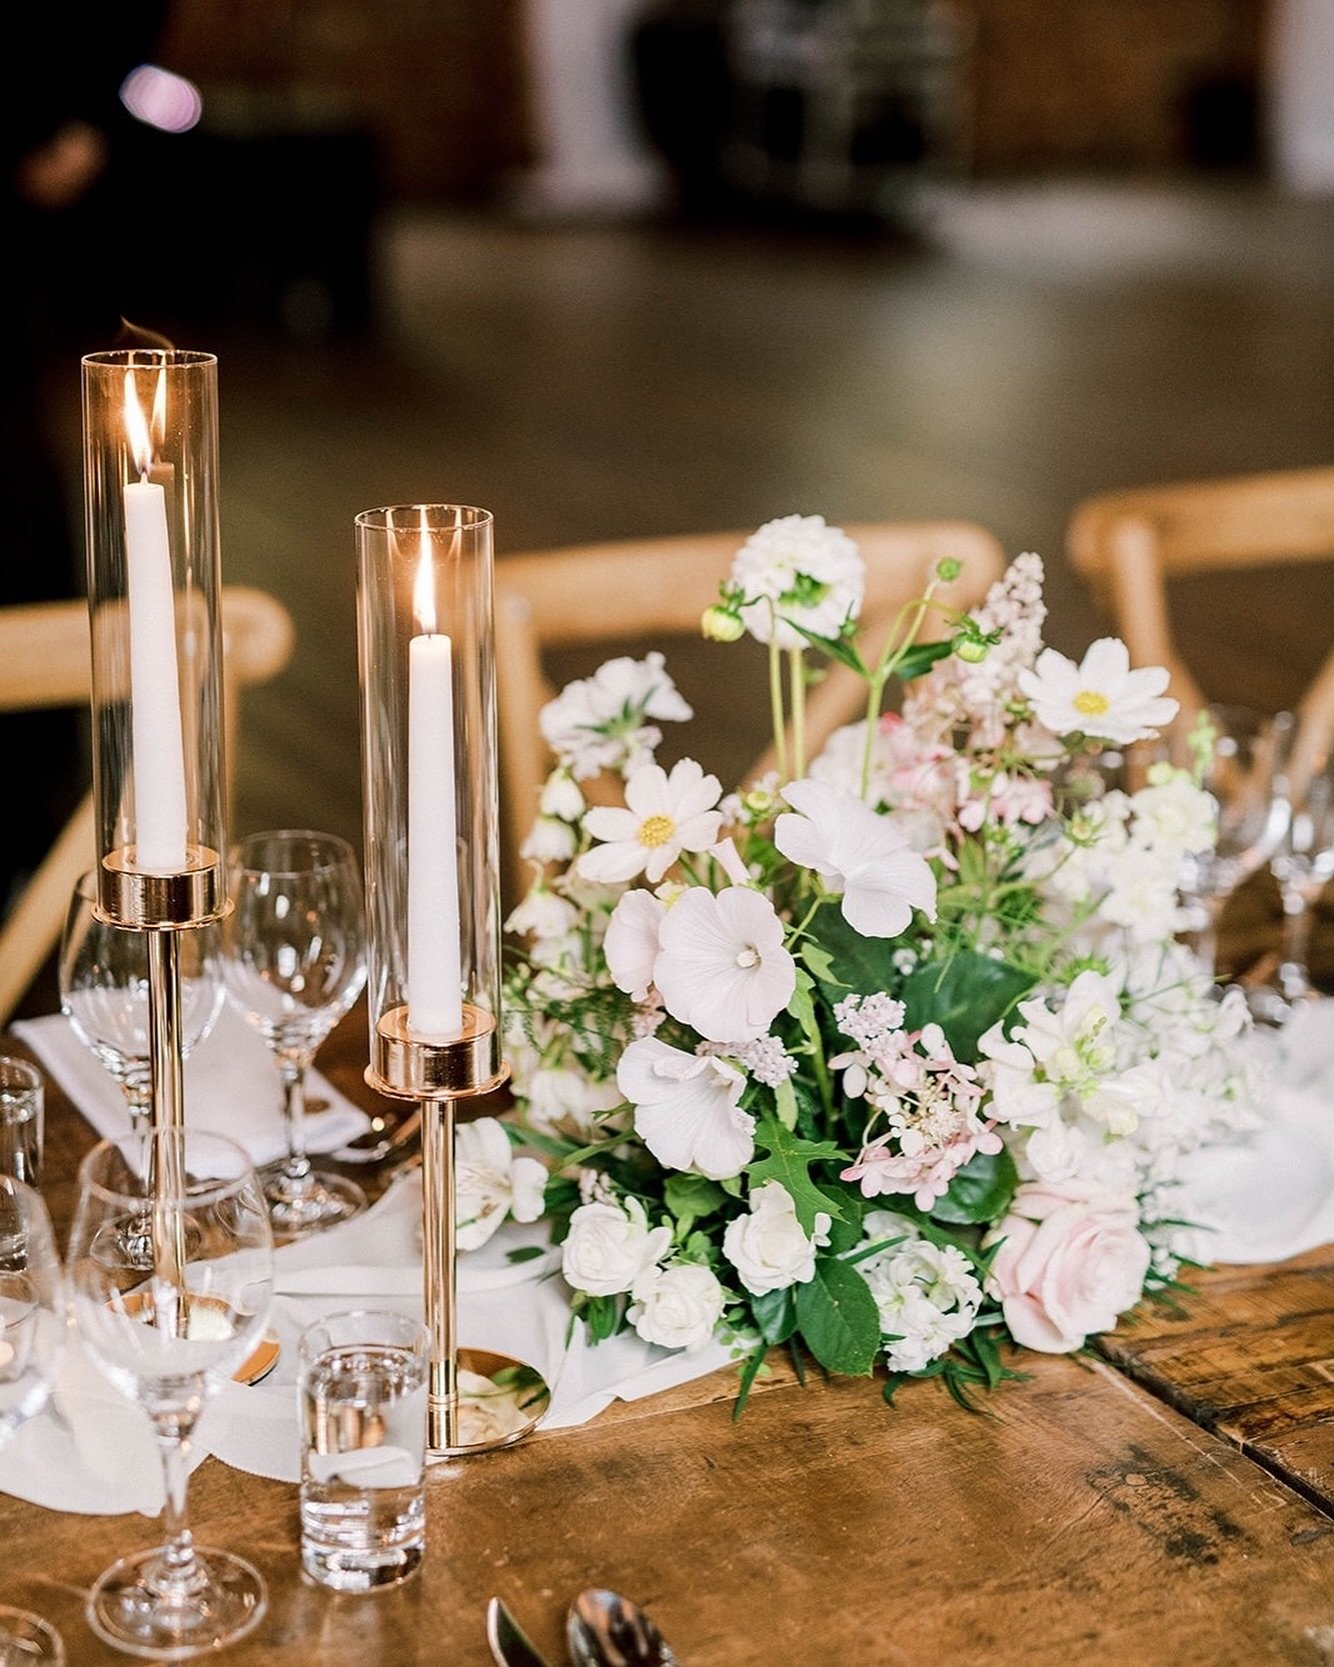 Table decorations and flowers are the. best. way. to enhance a table design! Candles and things definitely add to it, but the flowers create the mood and decide what feelings are conveyed!
So think about it, what do you want the design of your weddin